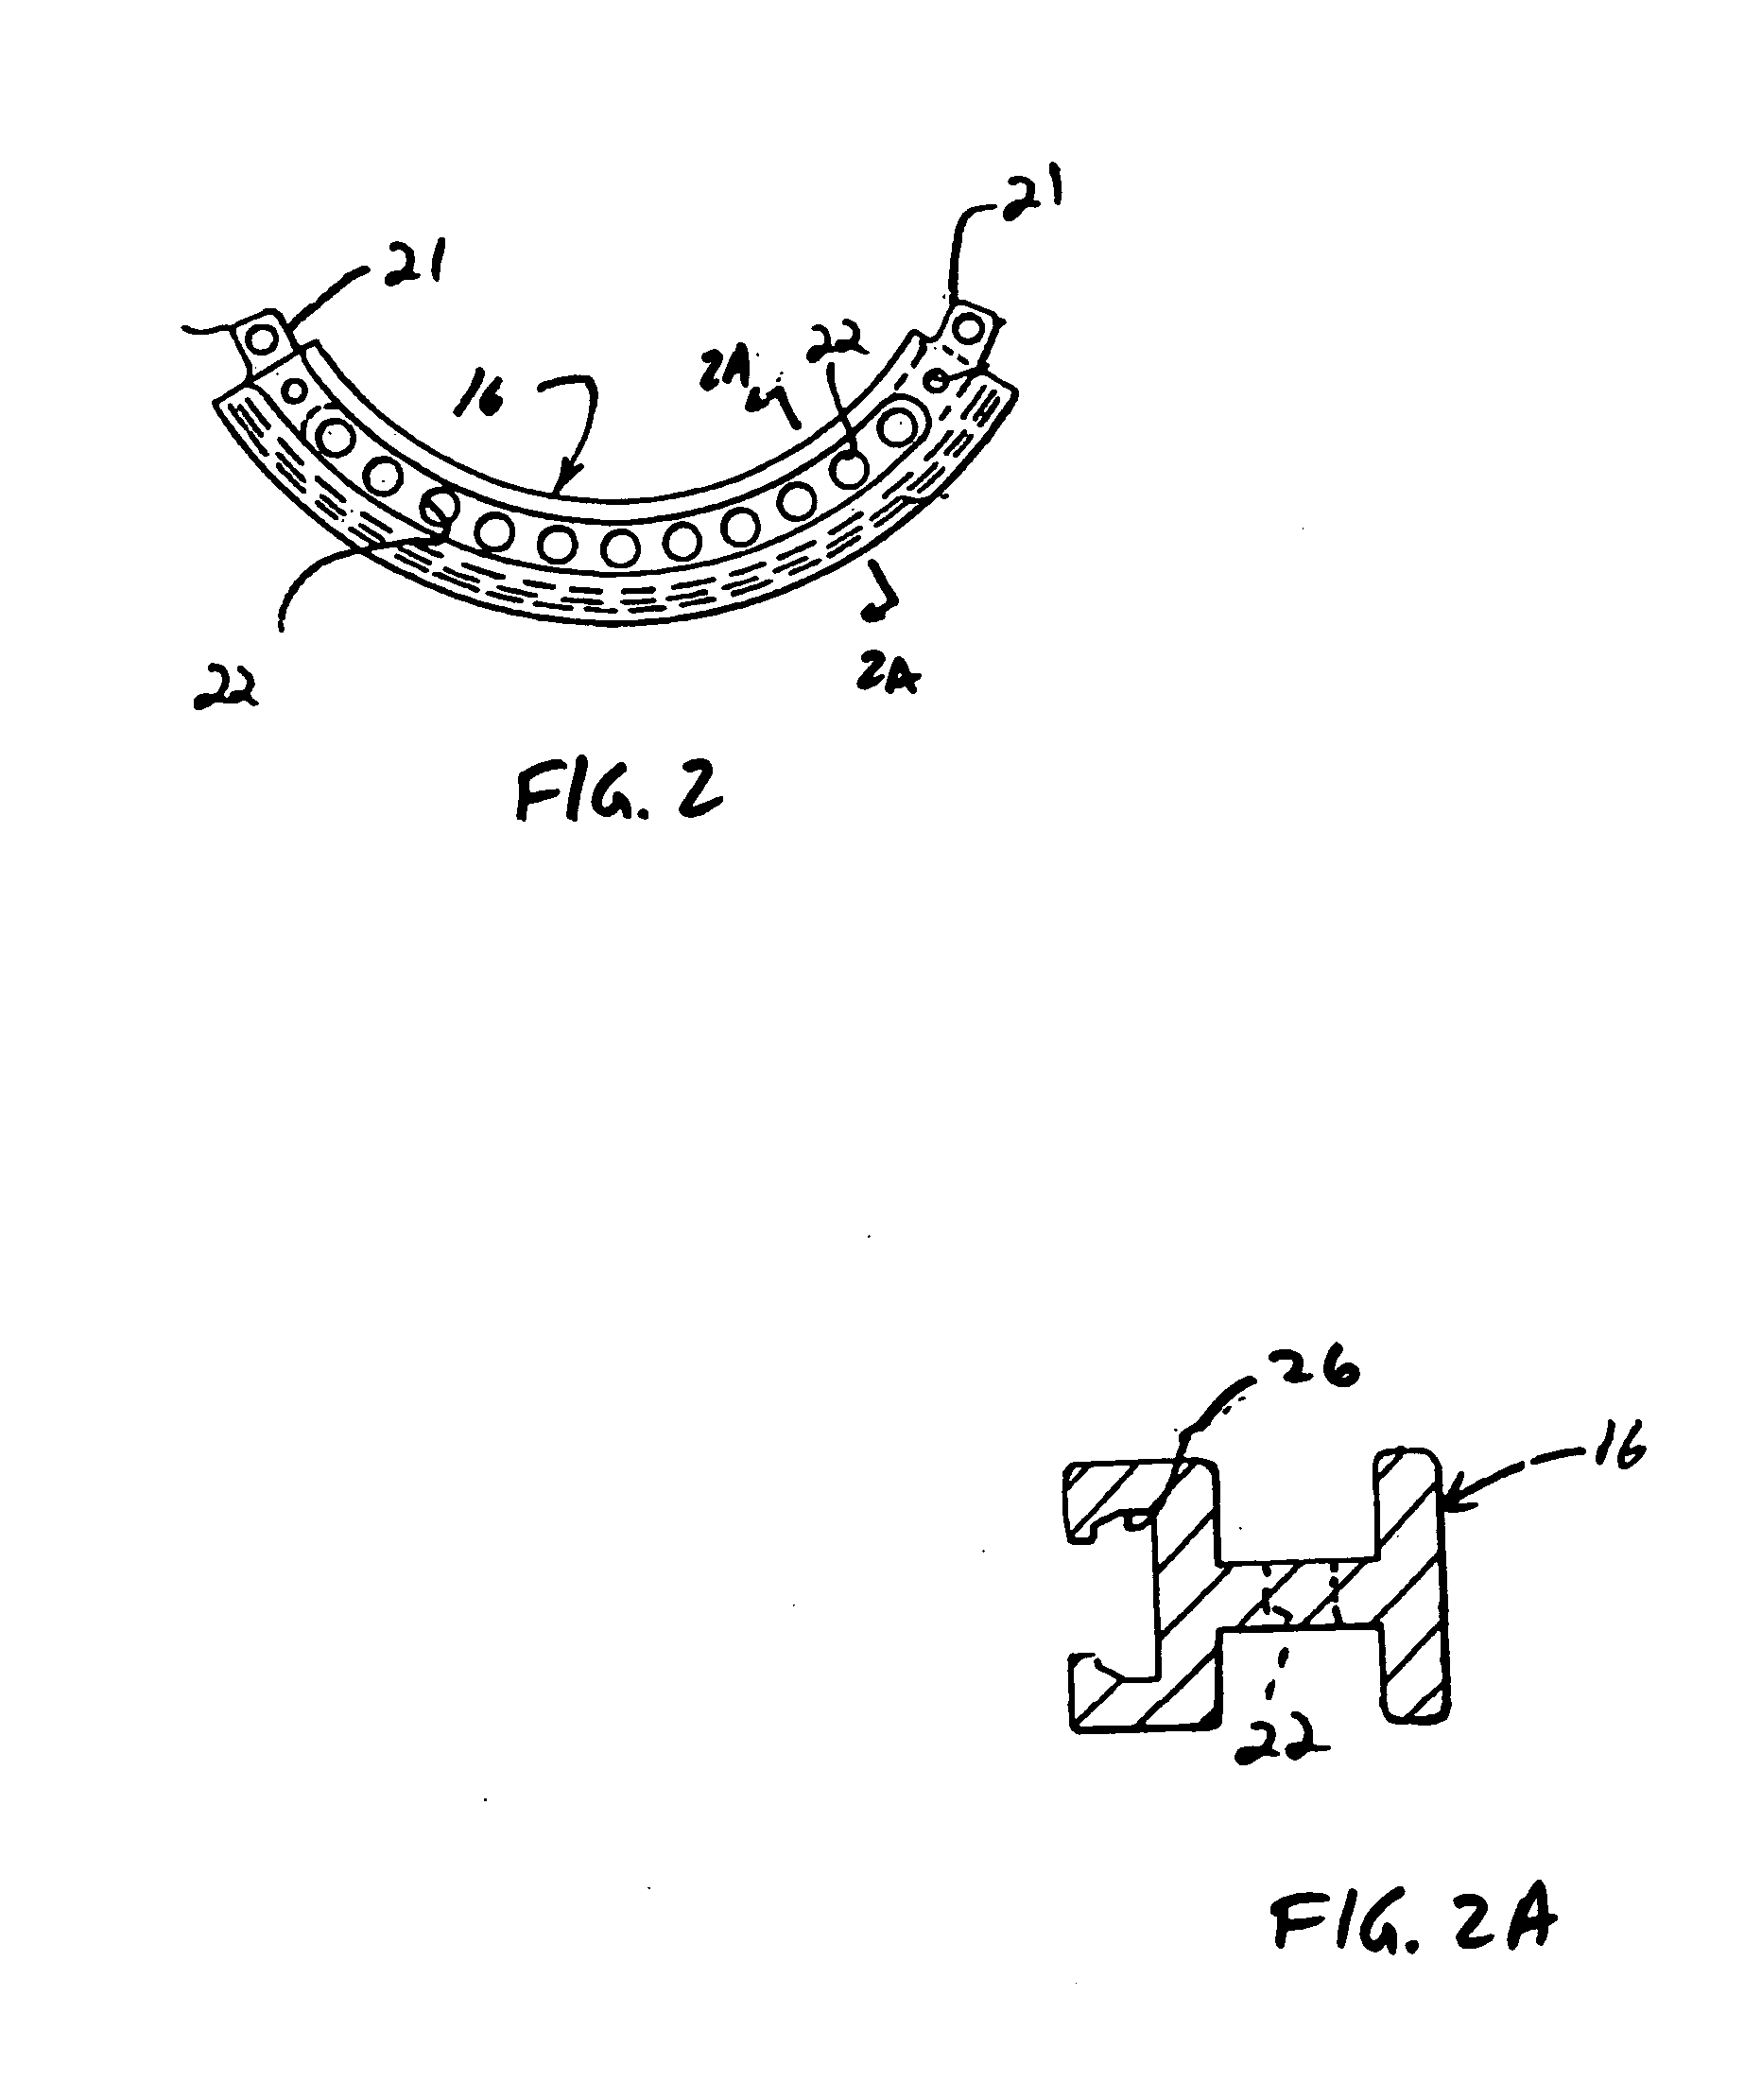 Method and apparatus for the external fixation and correction of bone